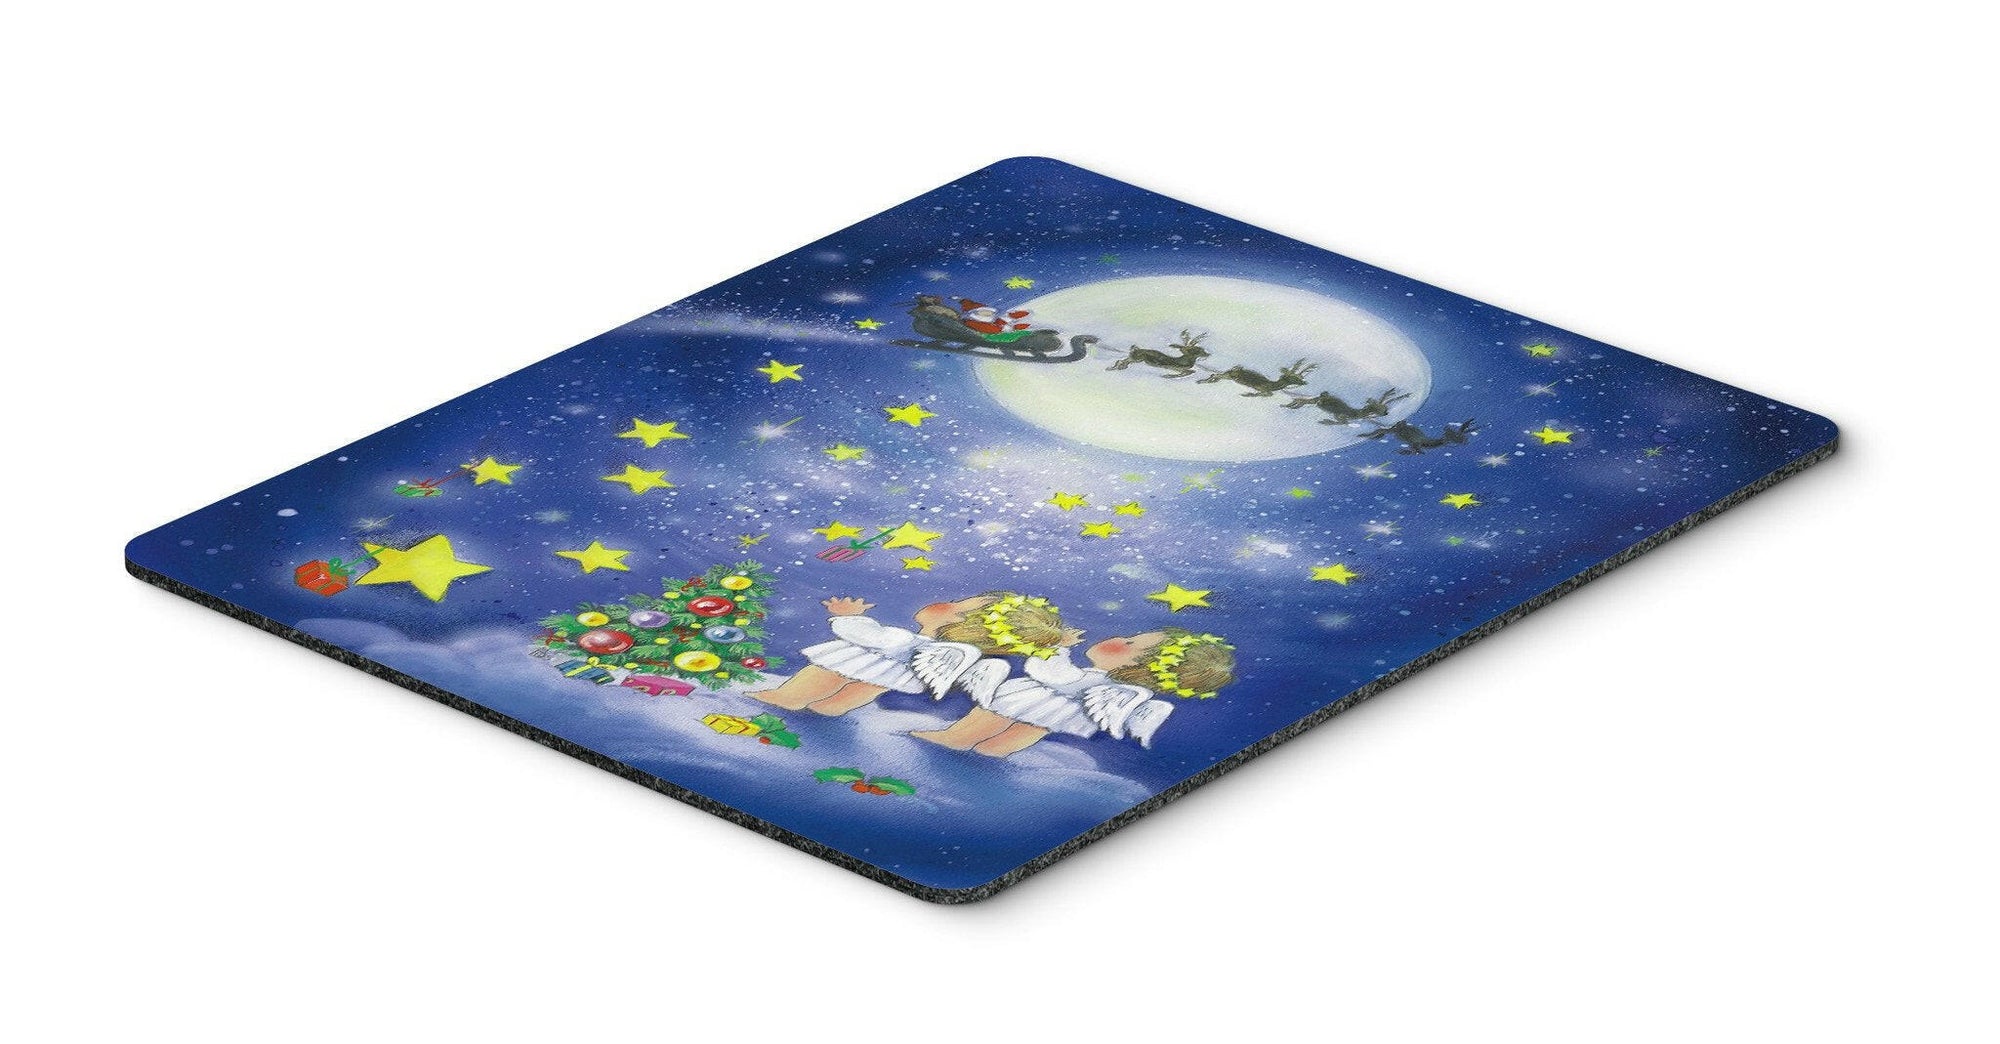 Angels watching Santa Claus Mouse Pad, Hot Pad or Trivet APH0690MP by Caroline's Treasures